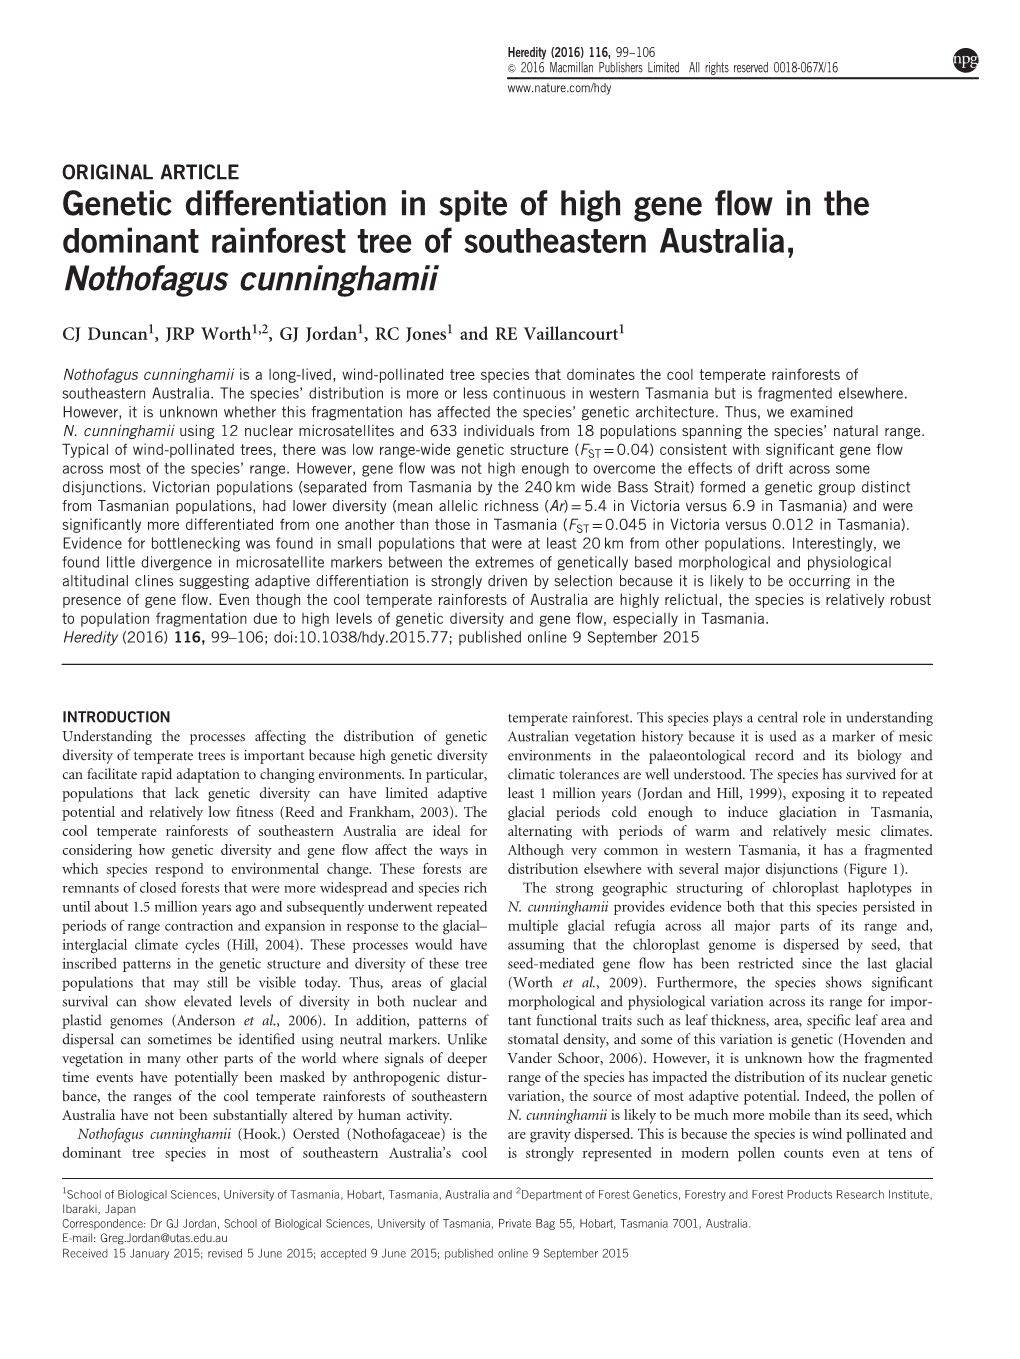 Genetic Differentiation in Spite of High Gene Flow in the Dominant Rainforest